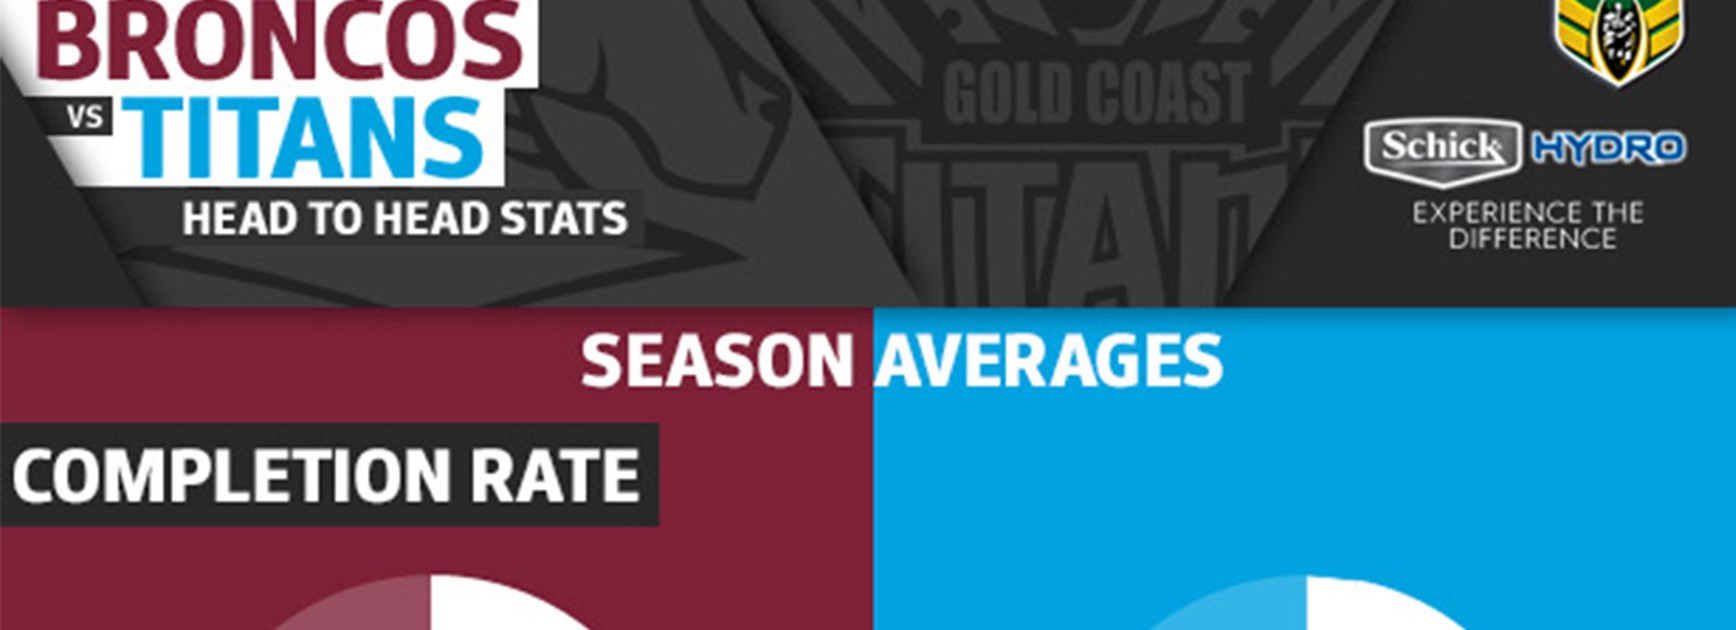 According to the Schick Hydro stats, not much will separate the Broncos and Titans in their elimination final.